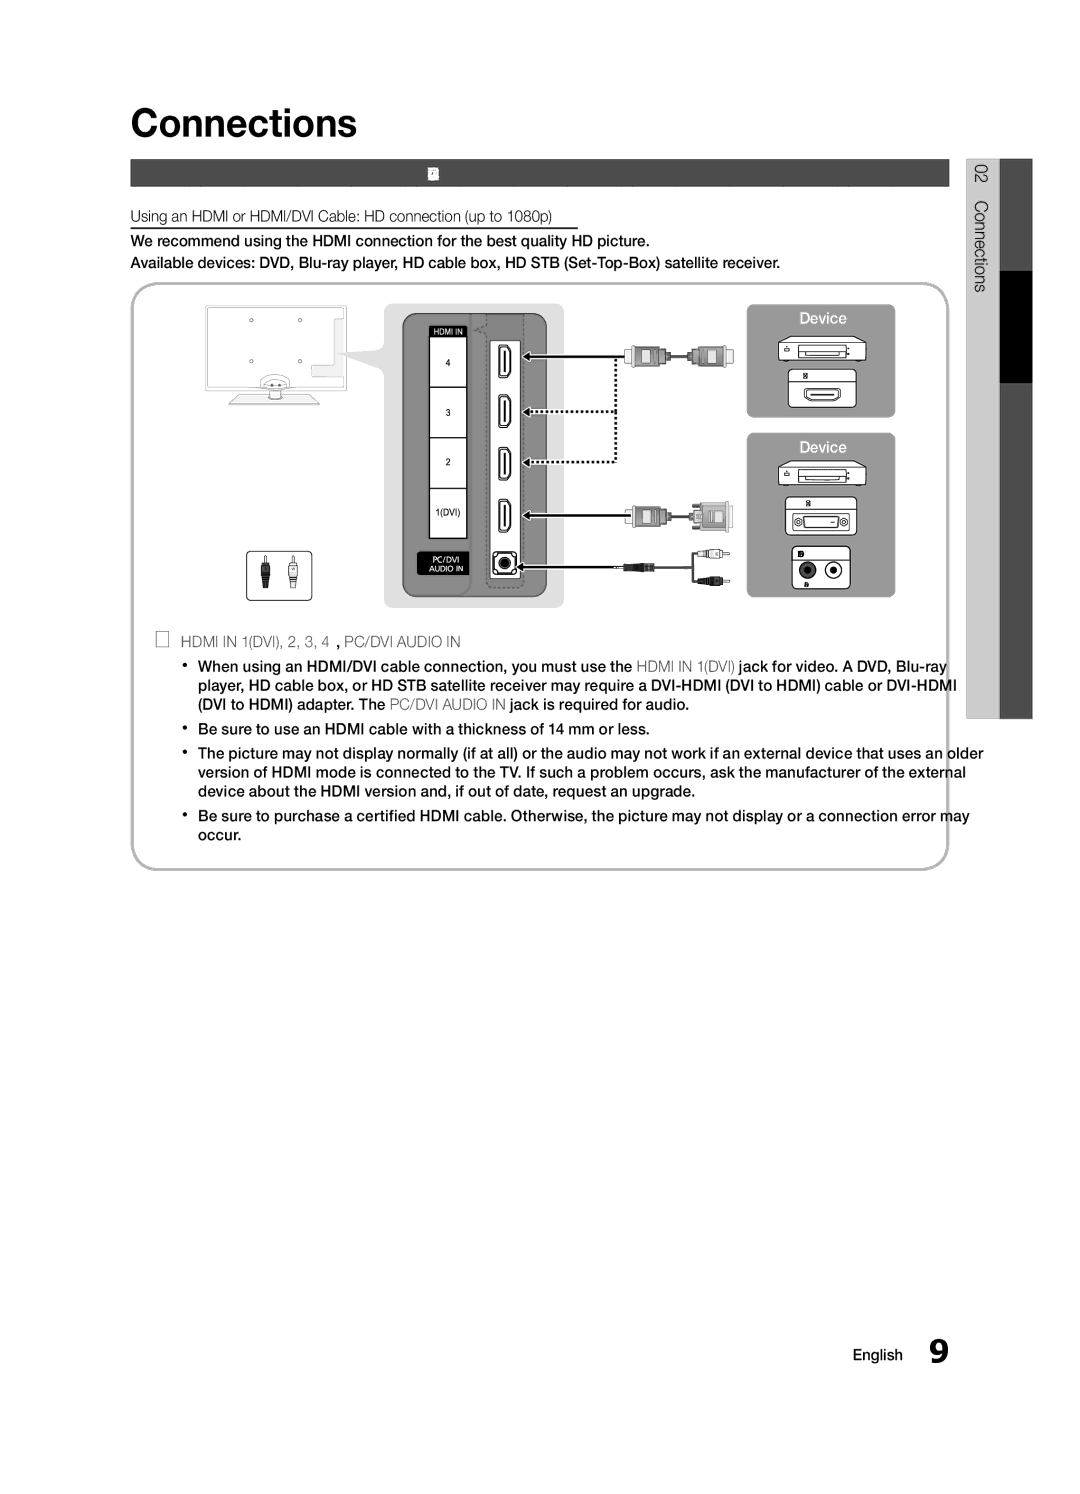 Samsung BN68-02625B-02, Series C5, UN40C5000 user manual Connections, Connecting to an AV Device 